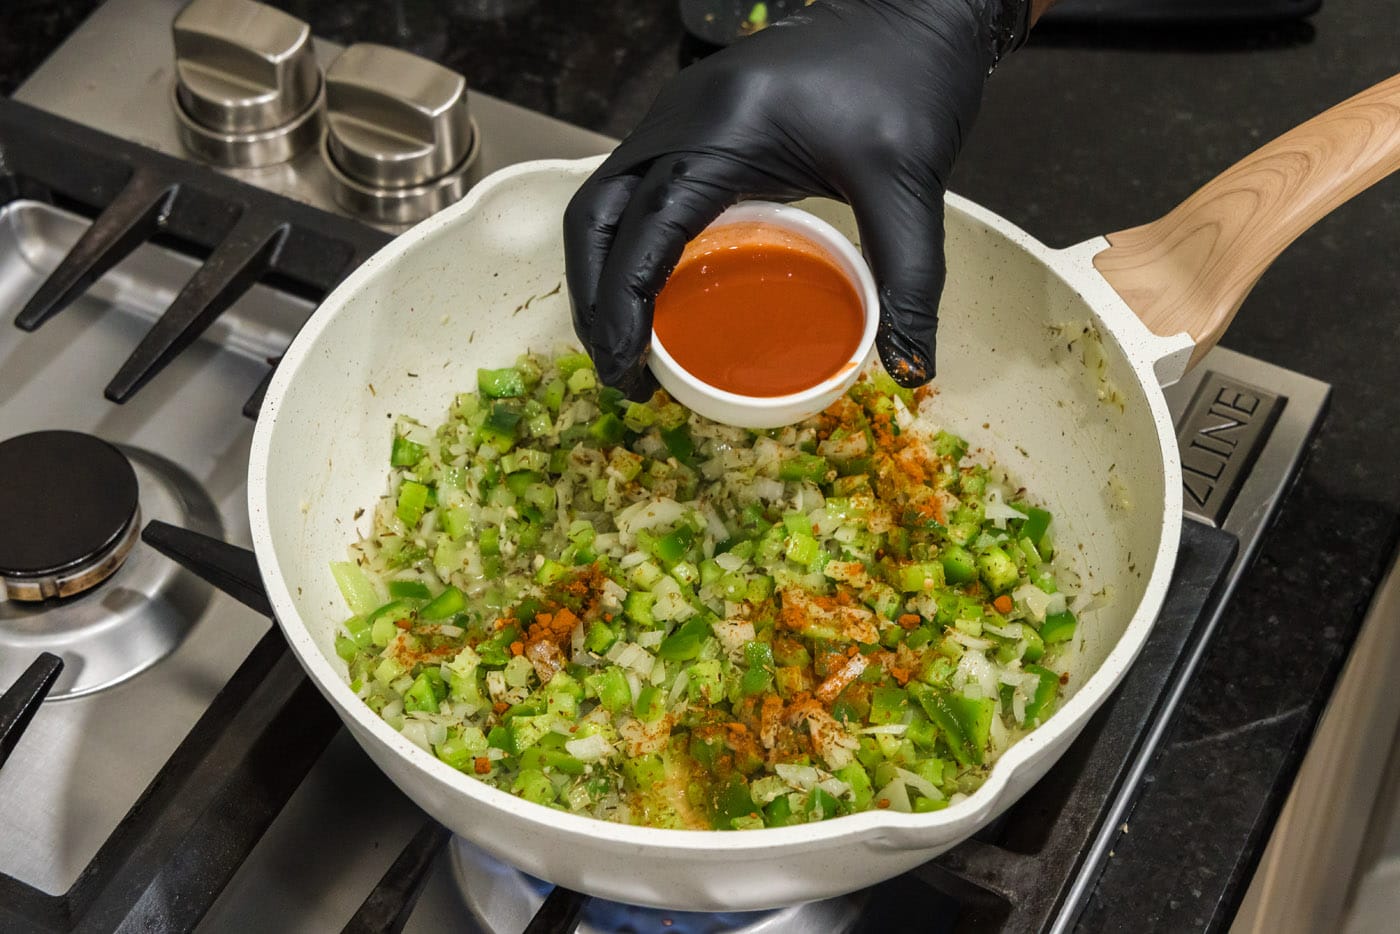 pouring hot sauce and spices into skillet of green pepper, onion, and celery